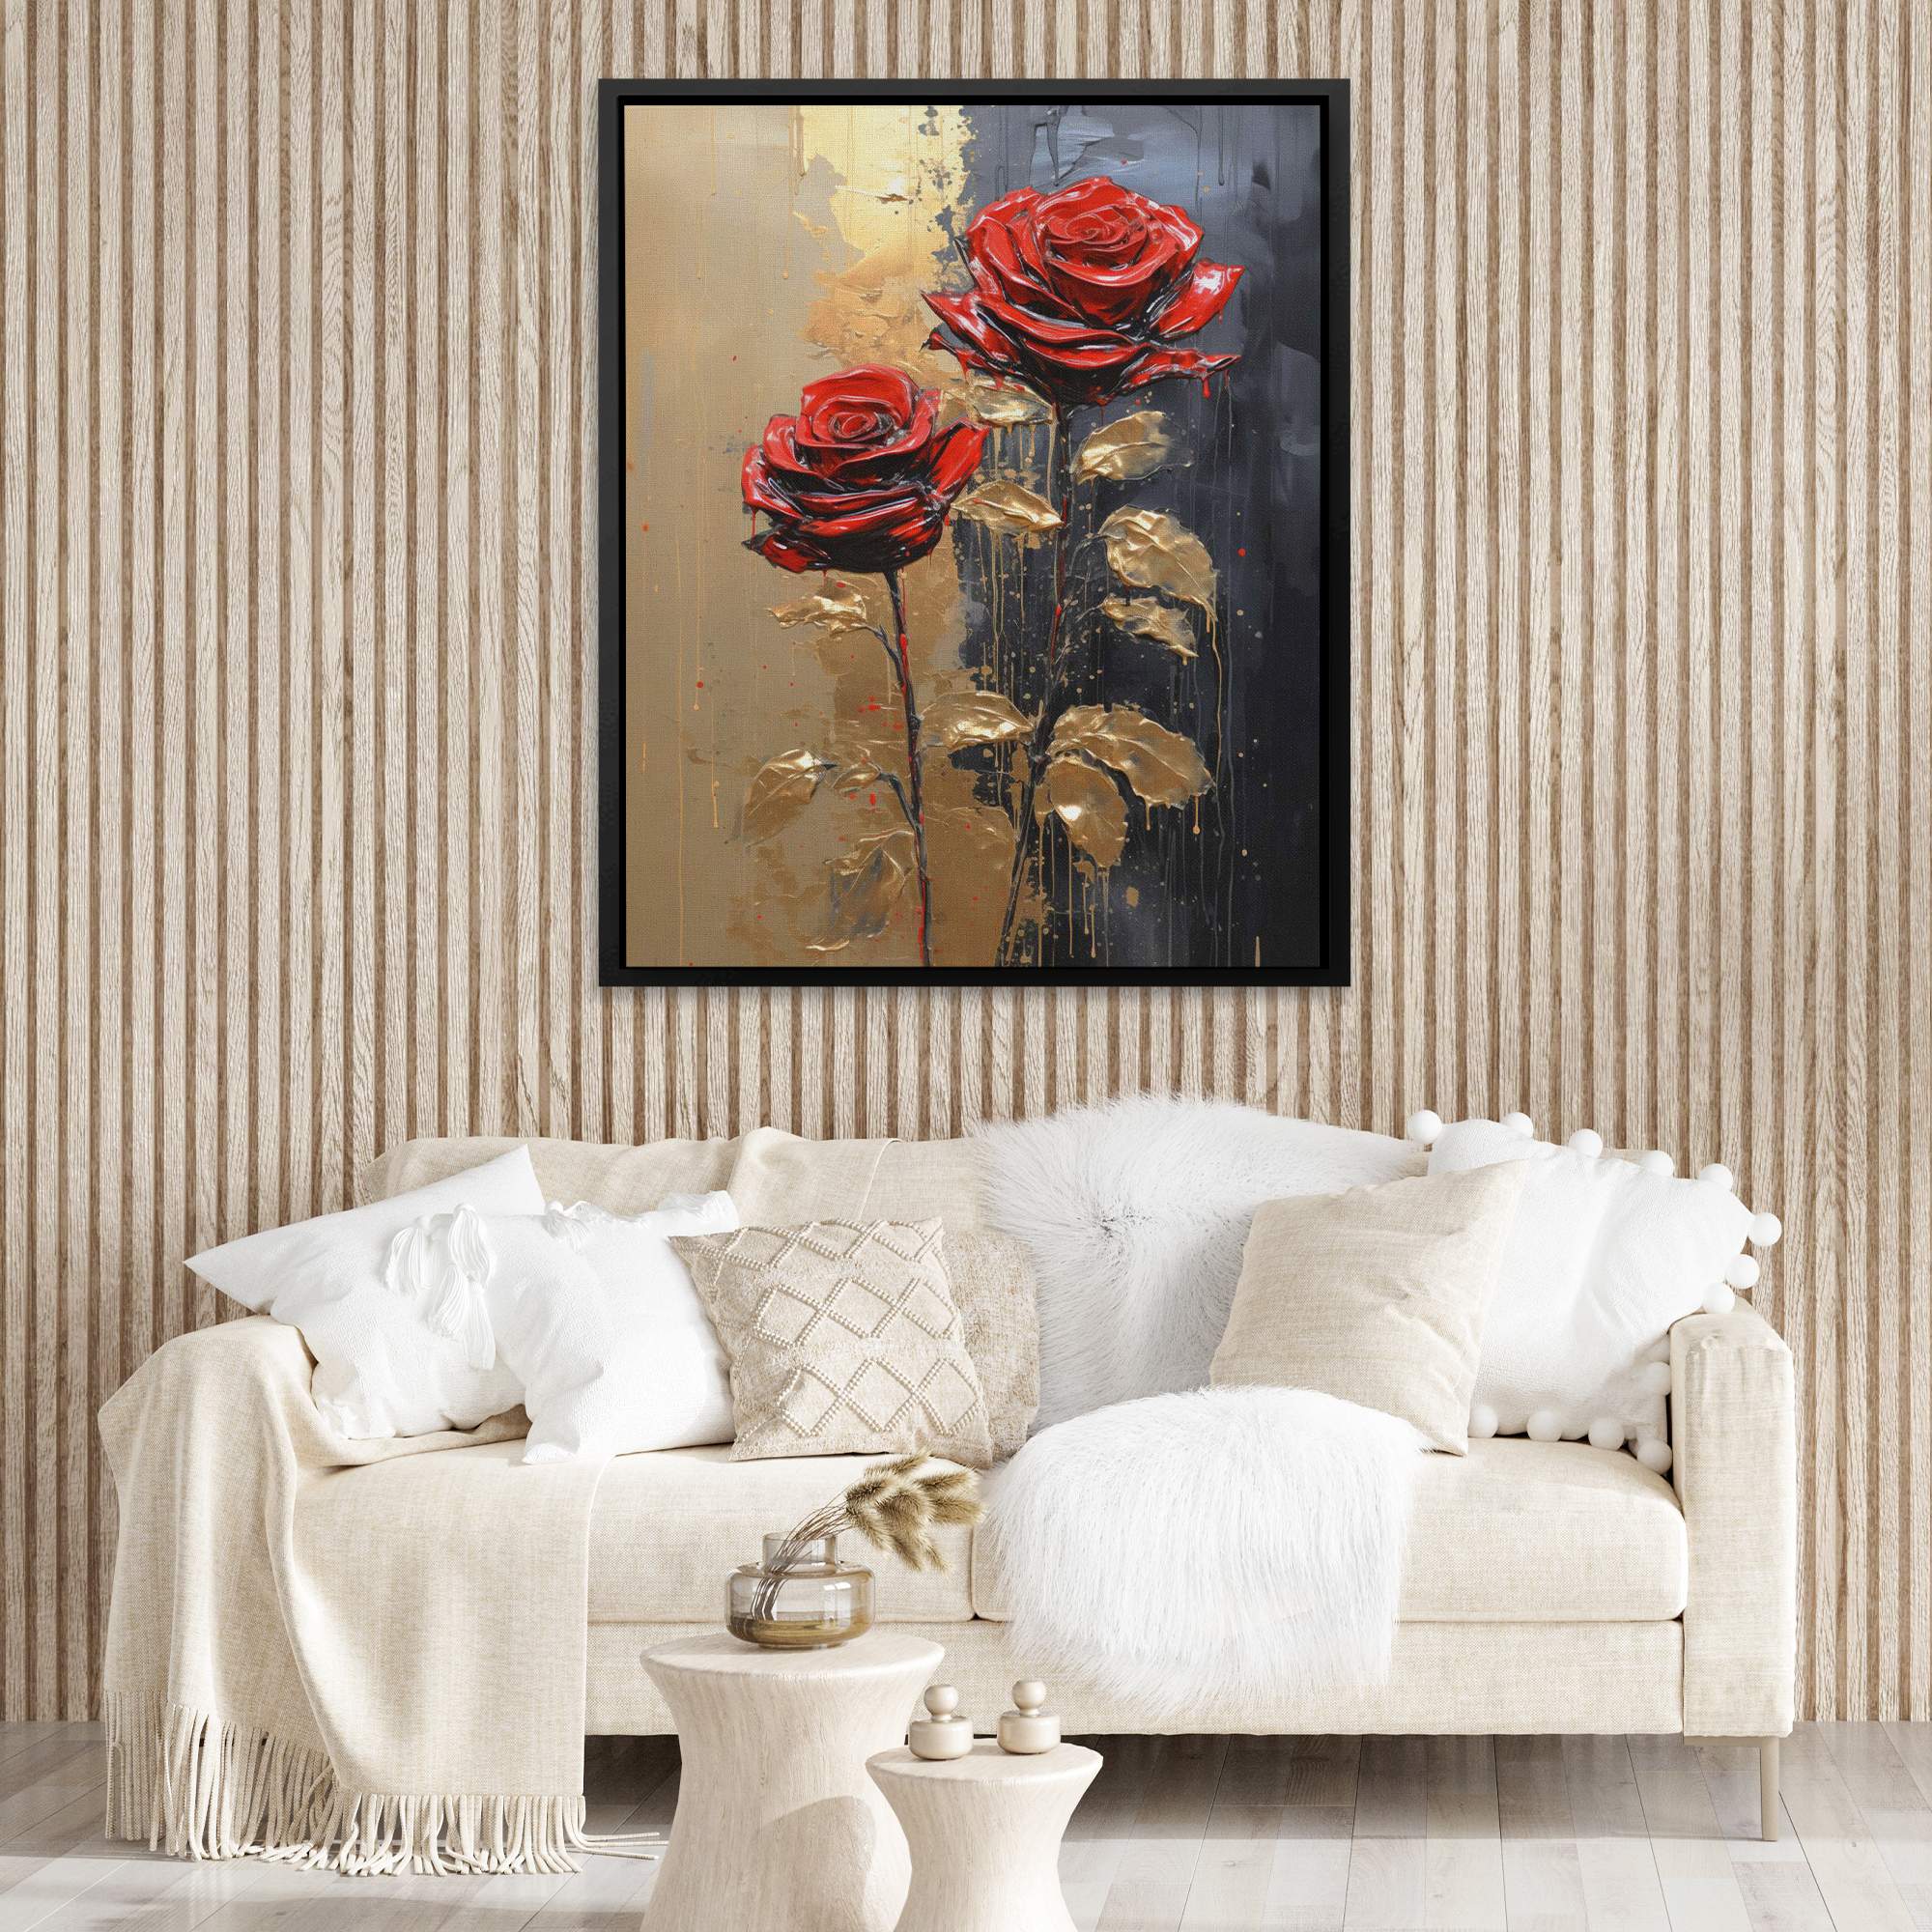 Enchanted Blossoms - Luxury Wall Art